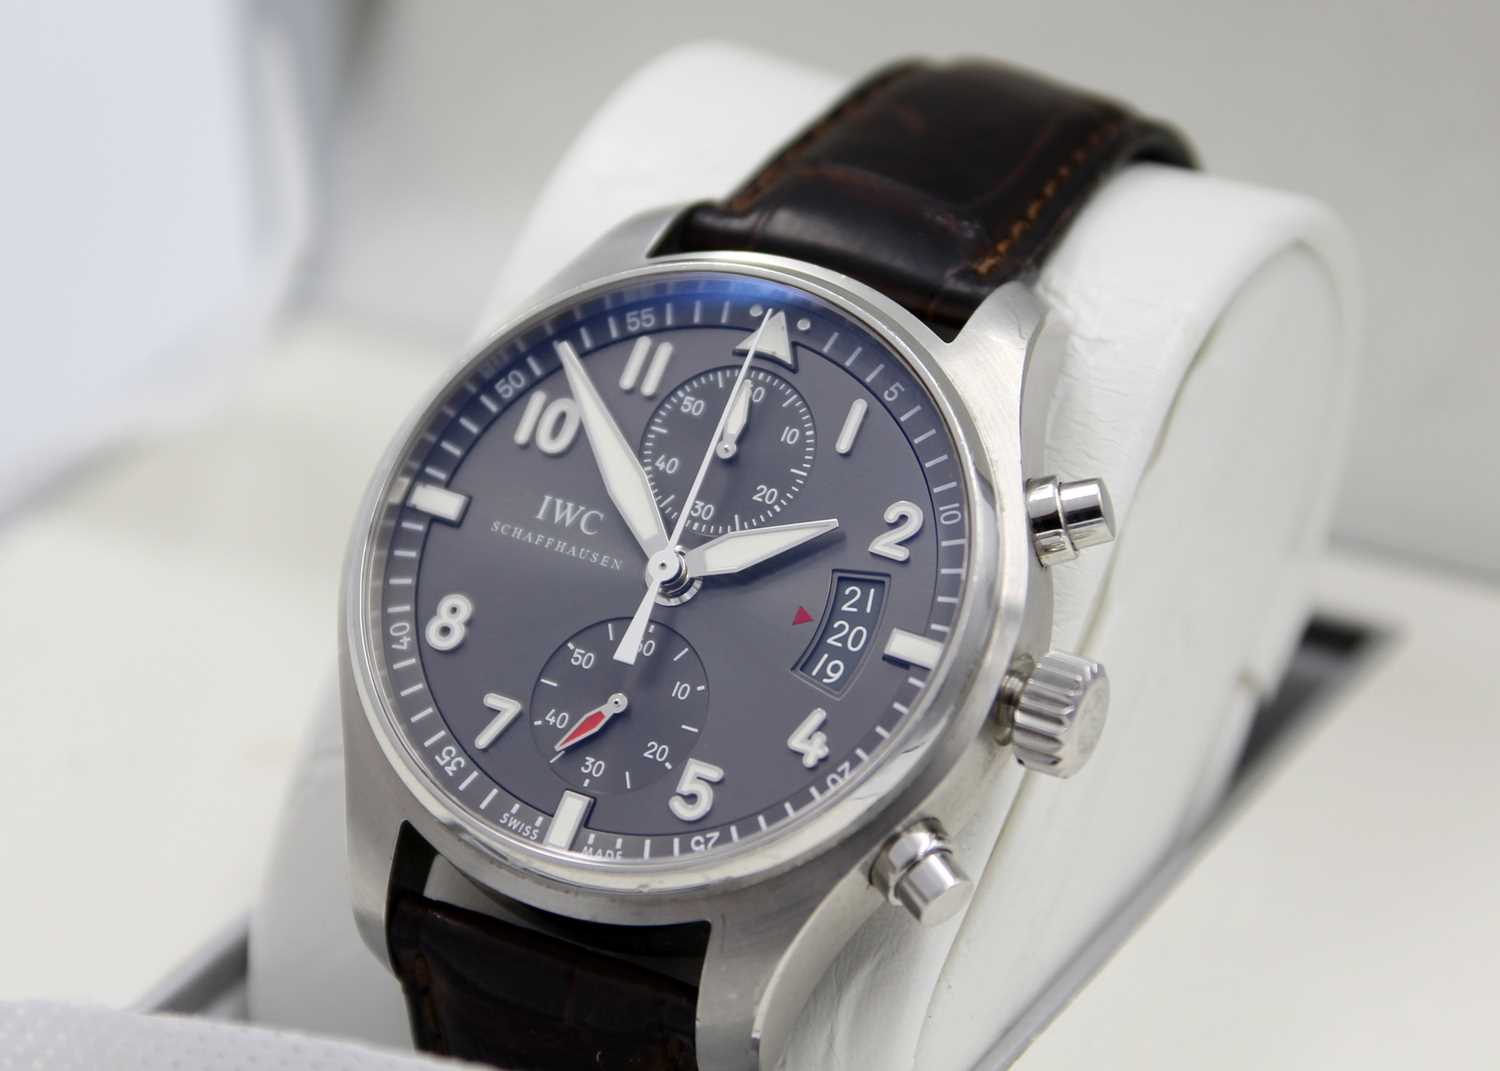 IWC - A Spitfire Chronograph stainless steel gentleman's automatic wristwatch ref. 3878. - Image 5 of 5